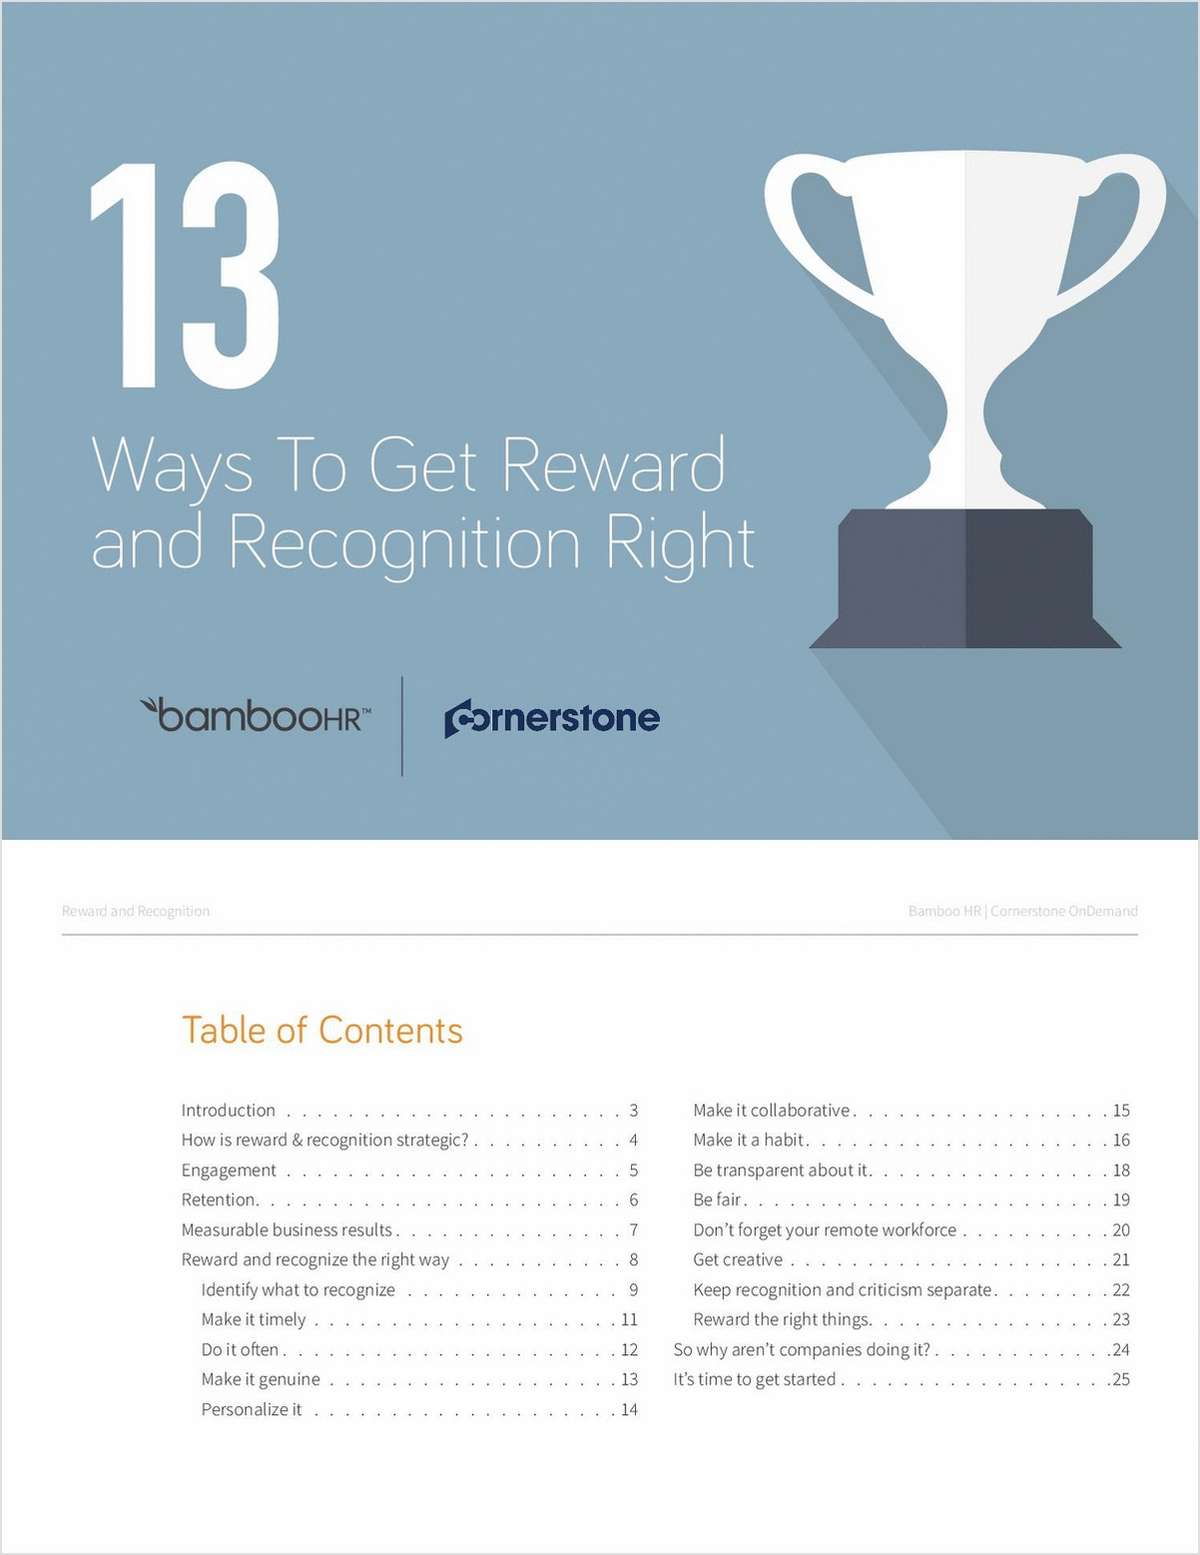 13 Ways to Get Reward and Recognition Right